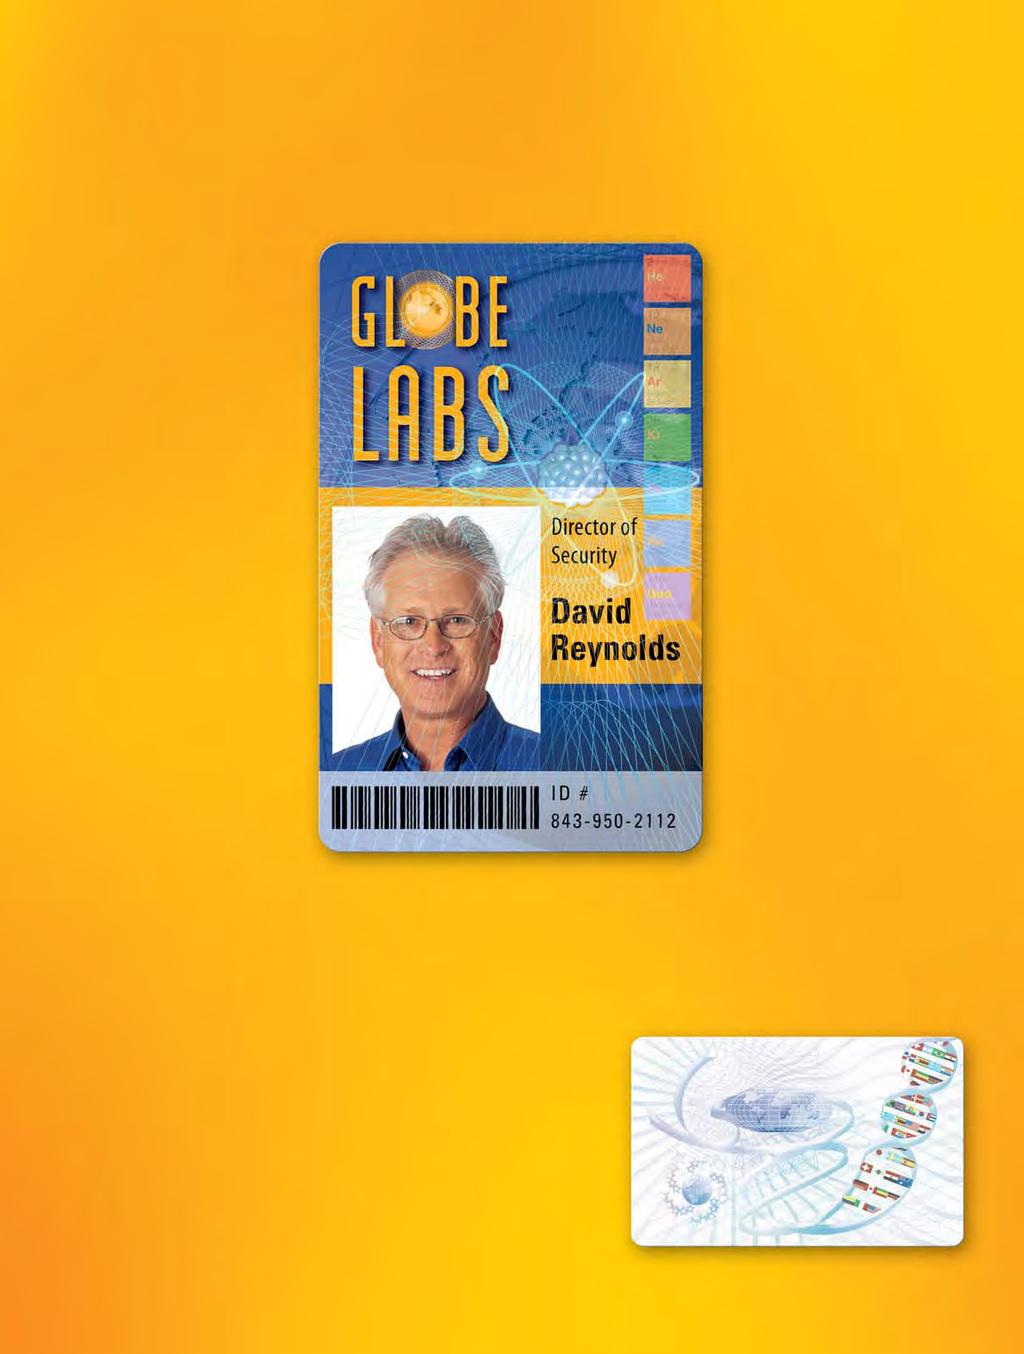 FARGO OVERLAMINATES Here s how one company reduces the risk of counterfeit cards. The Globe Labs card design shown here features a custom High-Secure Overlaminate.